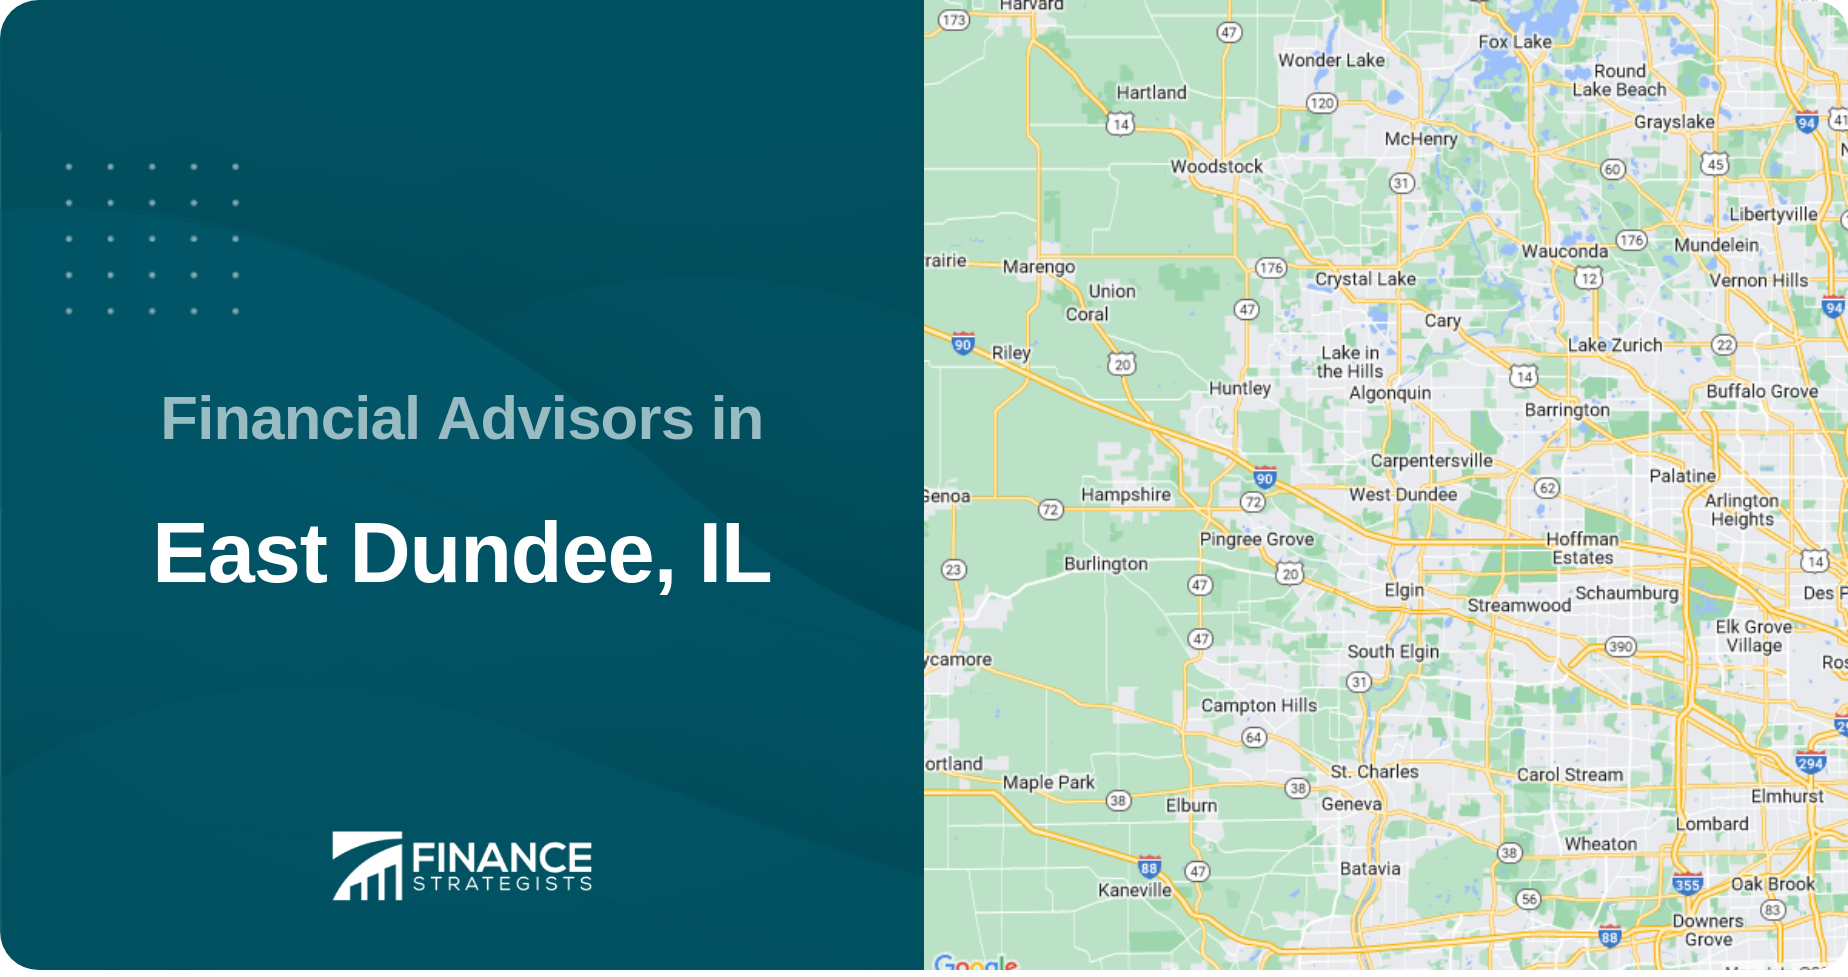 Financial Advisors in East Dundee, IL